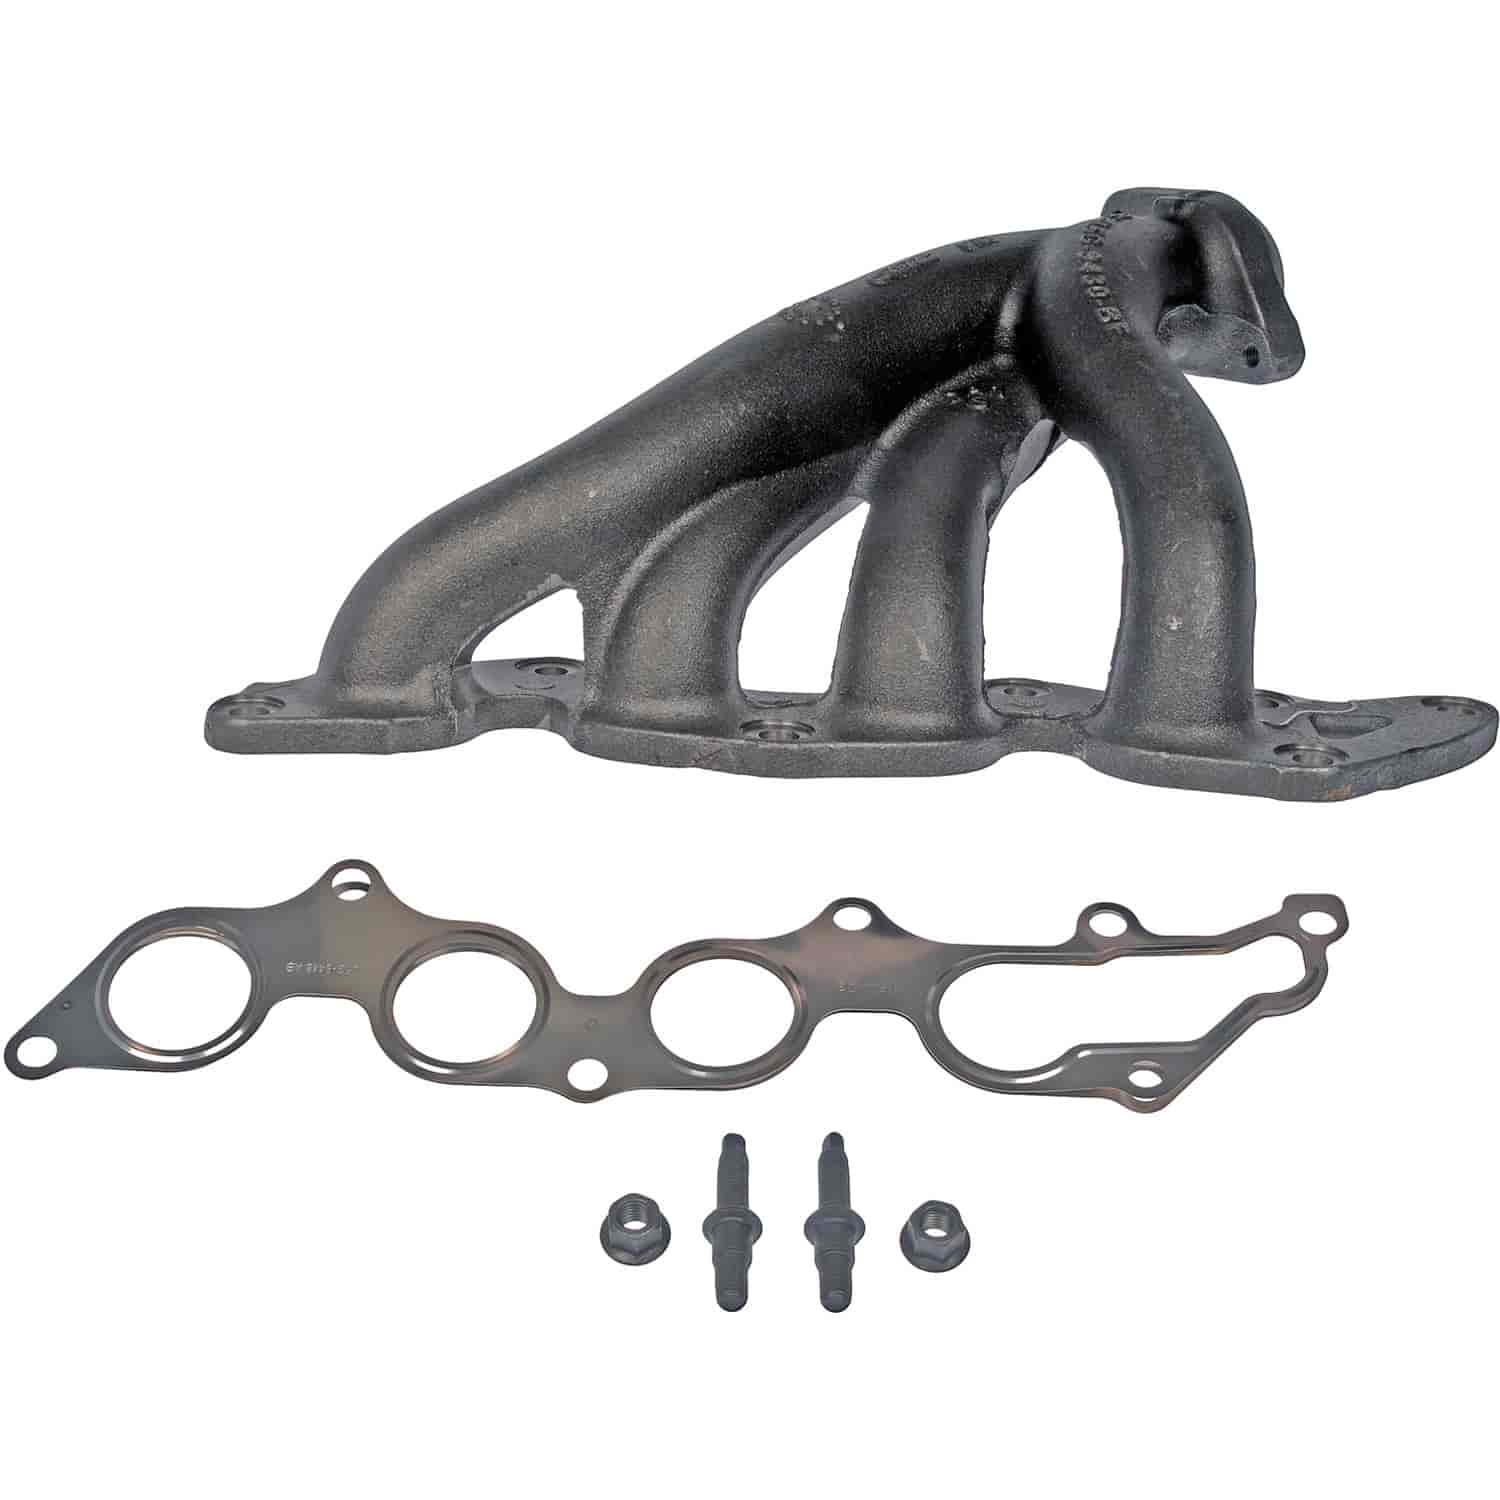 Exhaust Manifold Kit - Includes Required Gaskets and Hardware